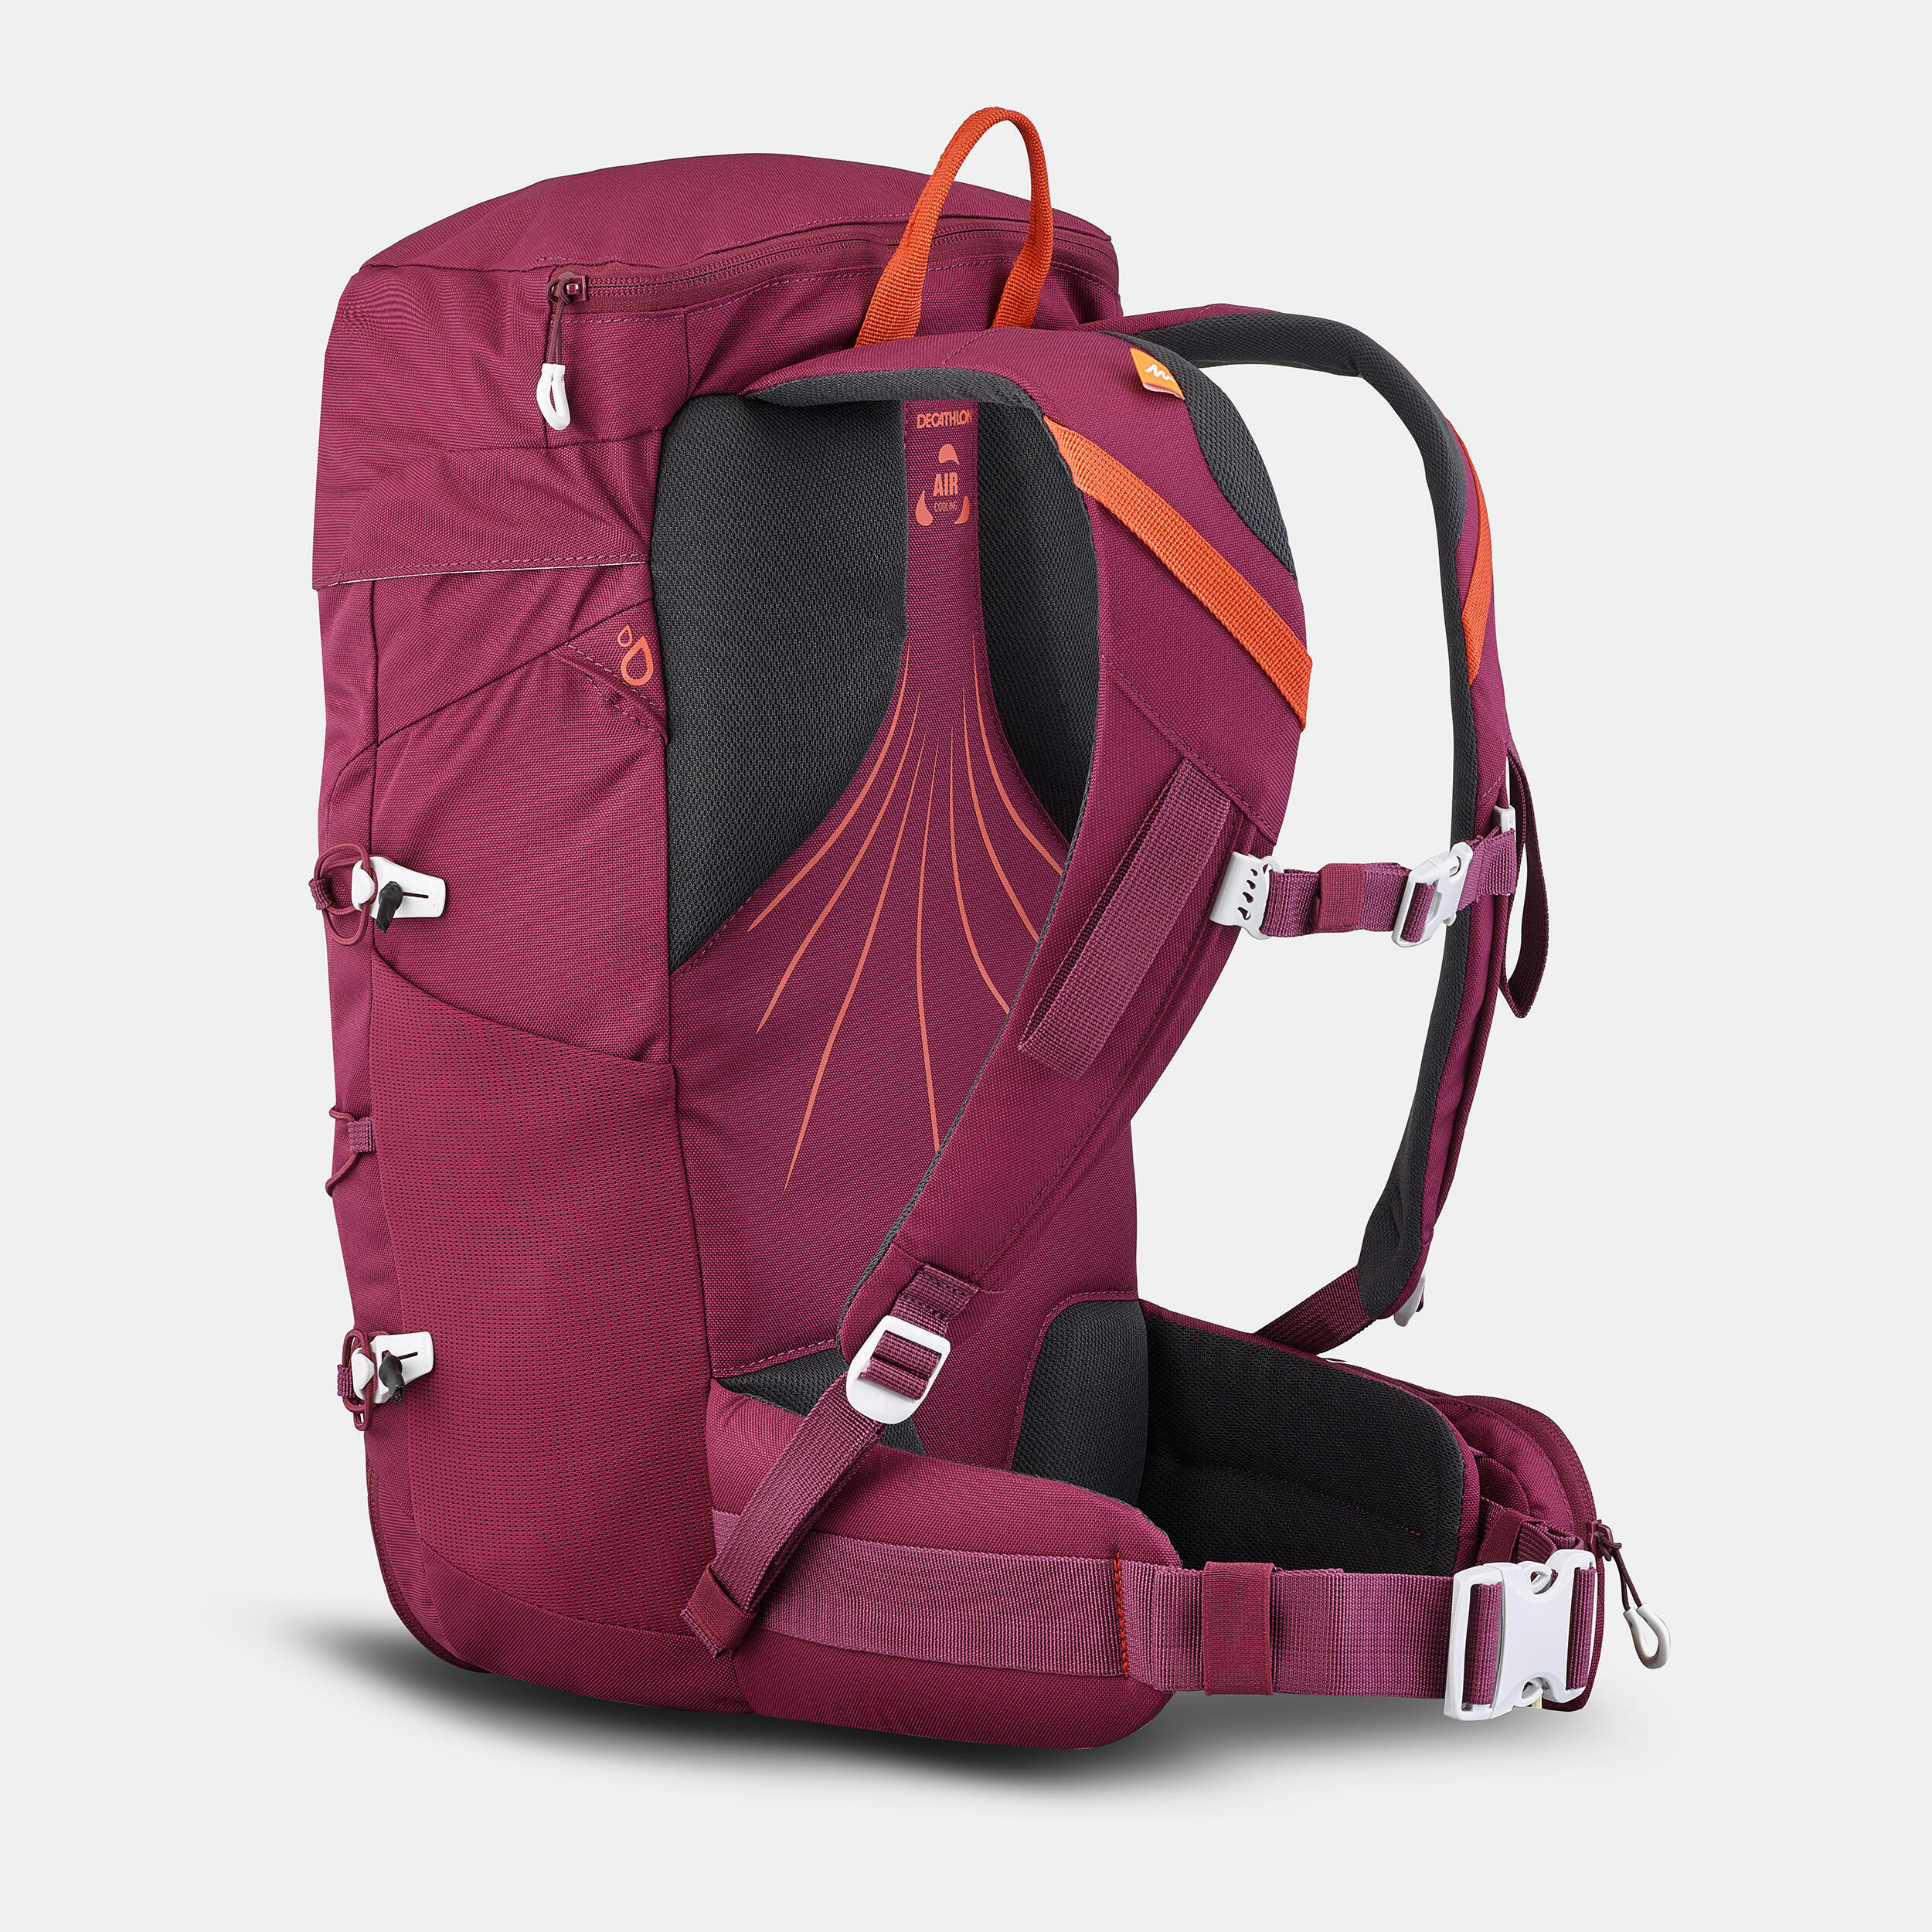 Mountain hiking backpack 20L - MH100 14/15